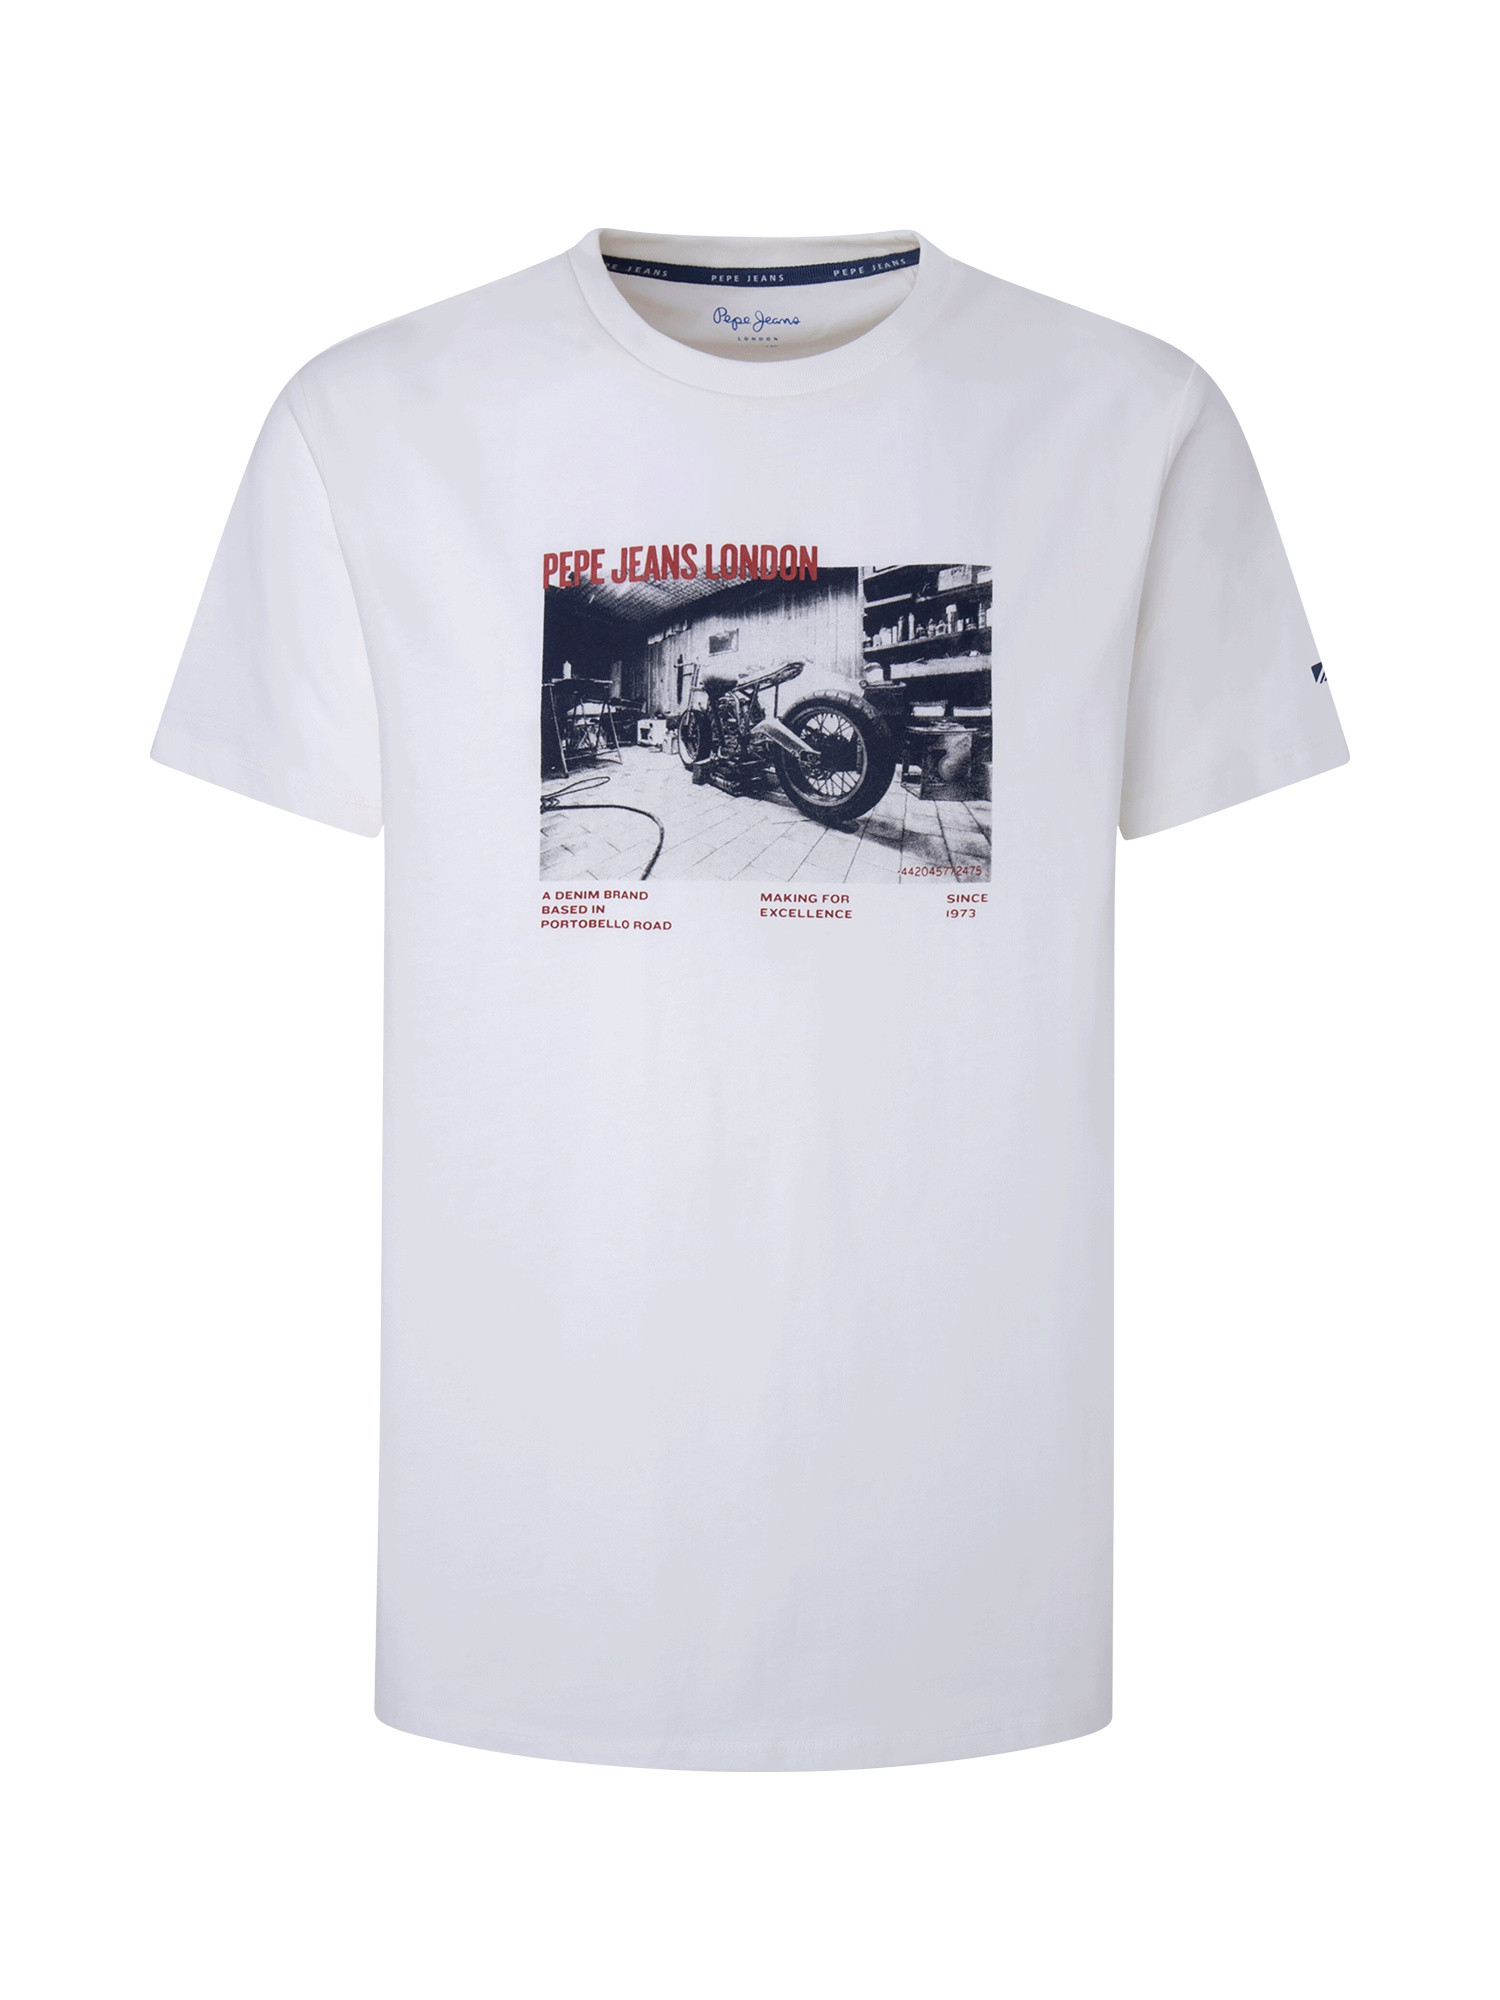 Pepe Jeans - T-shirt con stampa grafica in cotone, Bianco, large image number 0